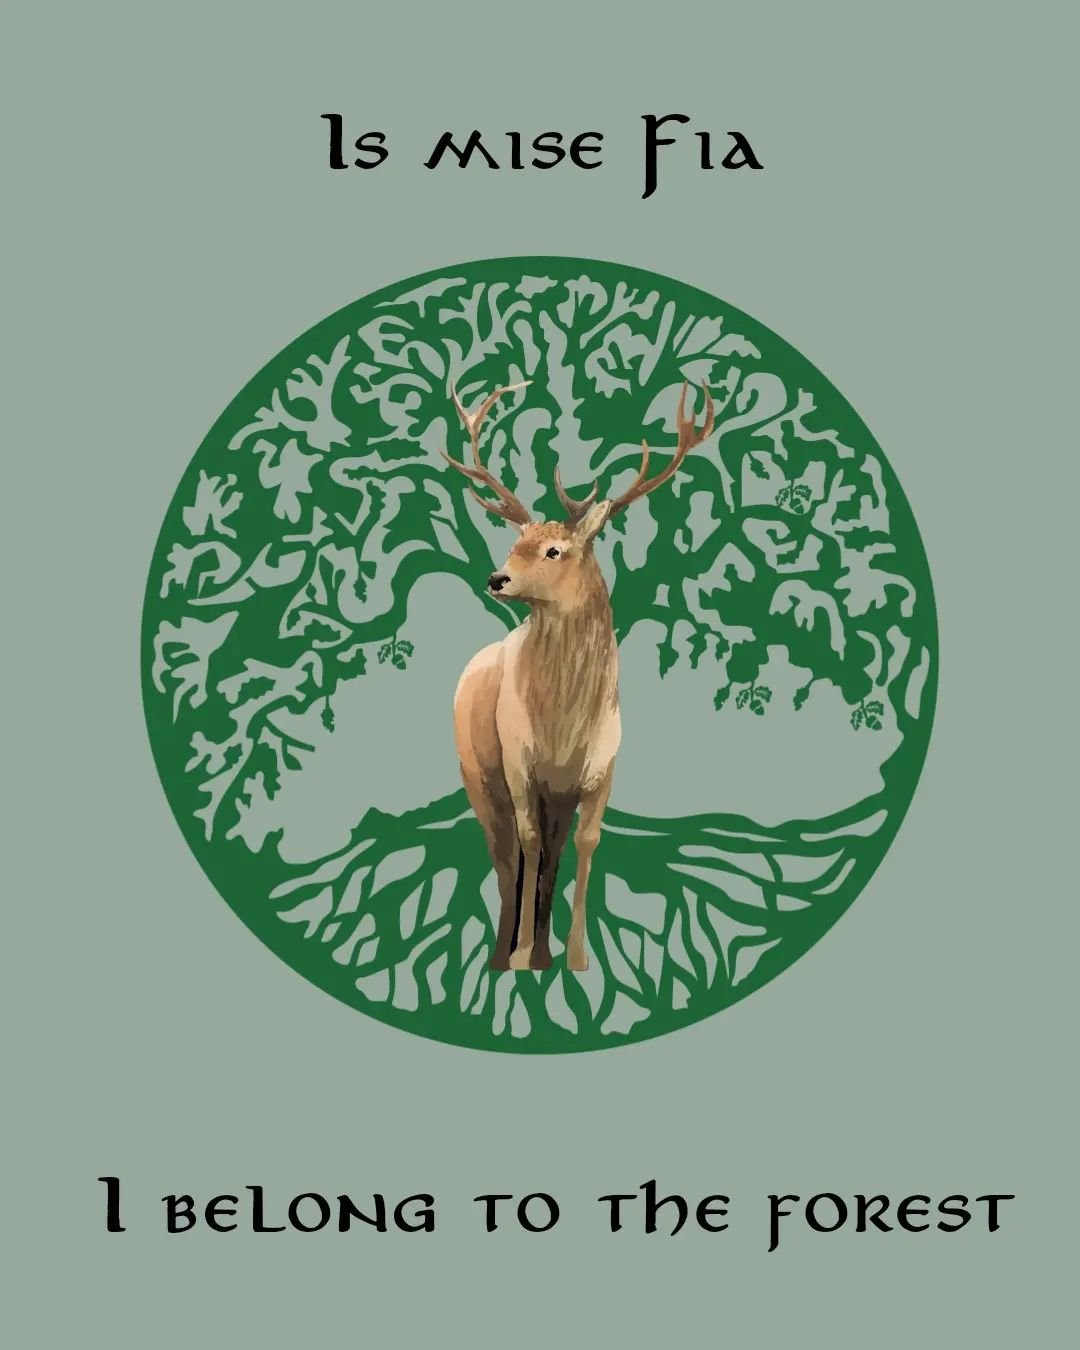 Is mise Fia, I belong to the forest. 
Land cannot be owned, we belong to it. 

Access to land is a basic right for all living beings. This should never be something limited to those with the wealth or financial resources to &quot;buy&quot; land. 

It